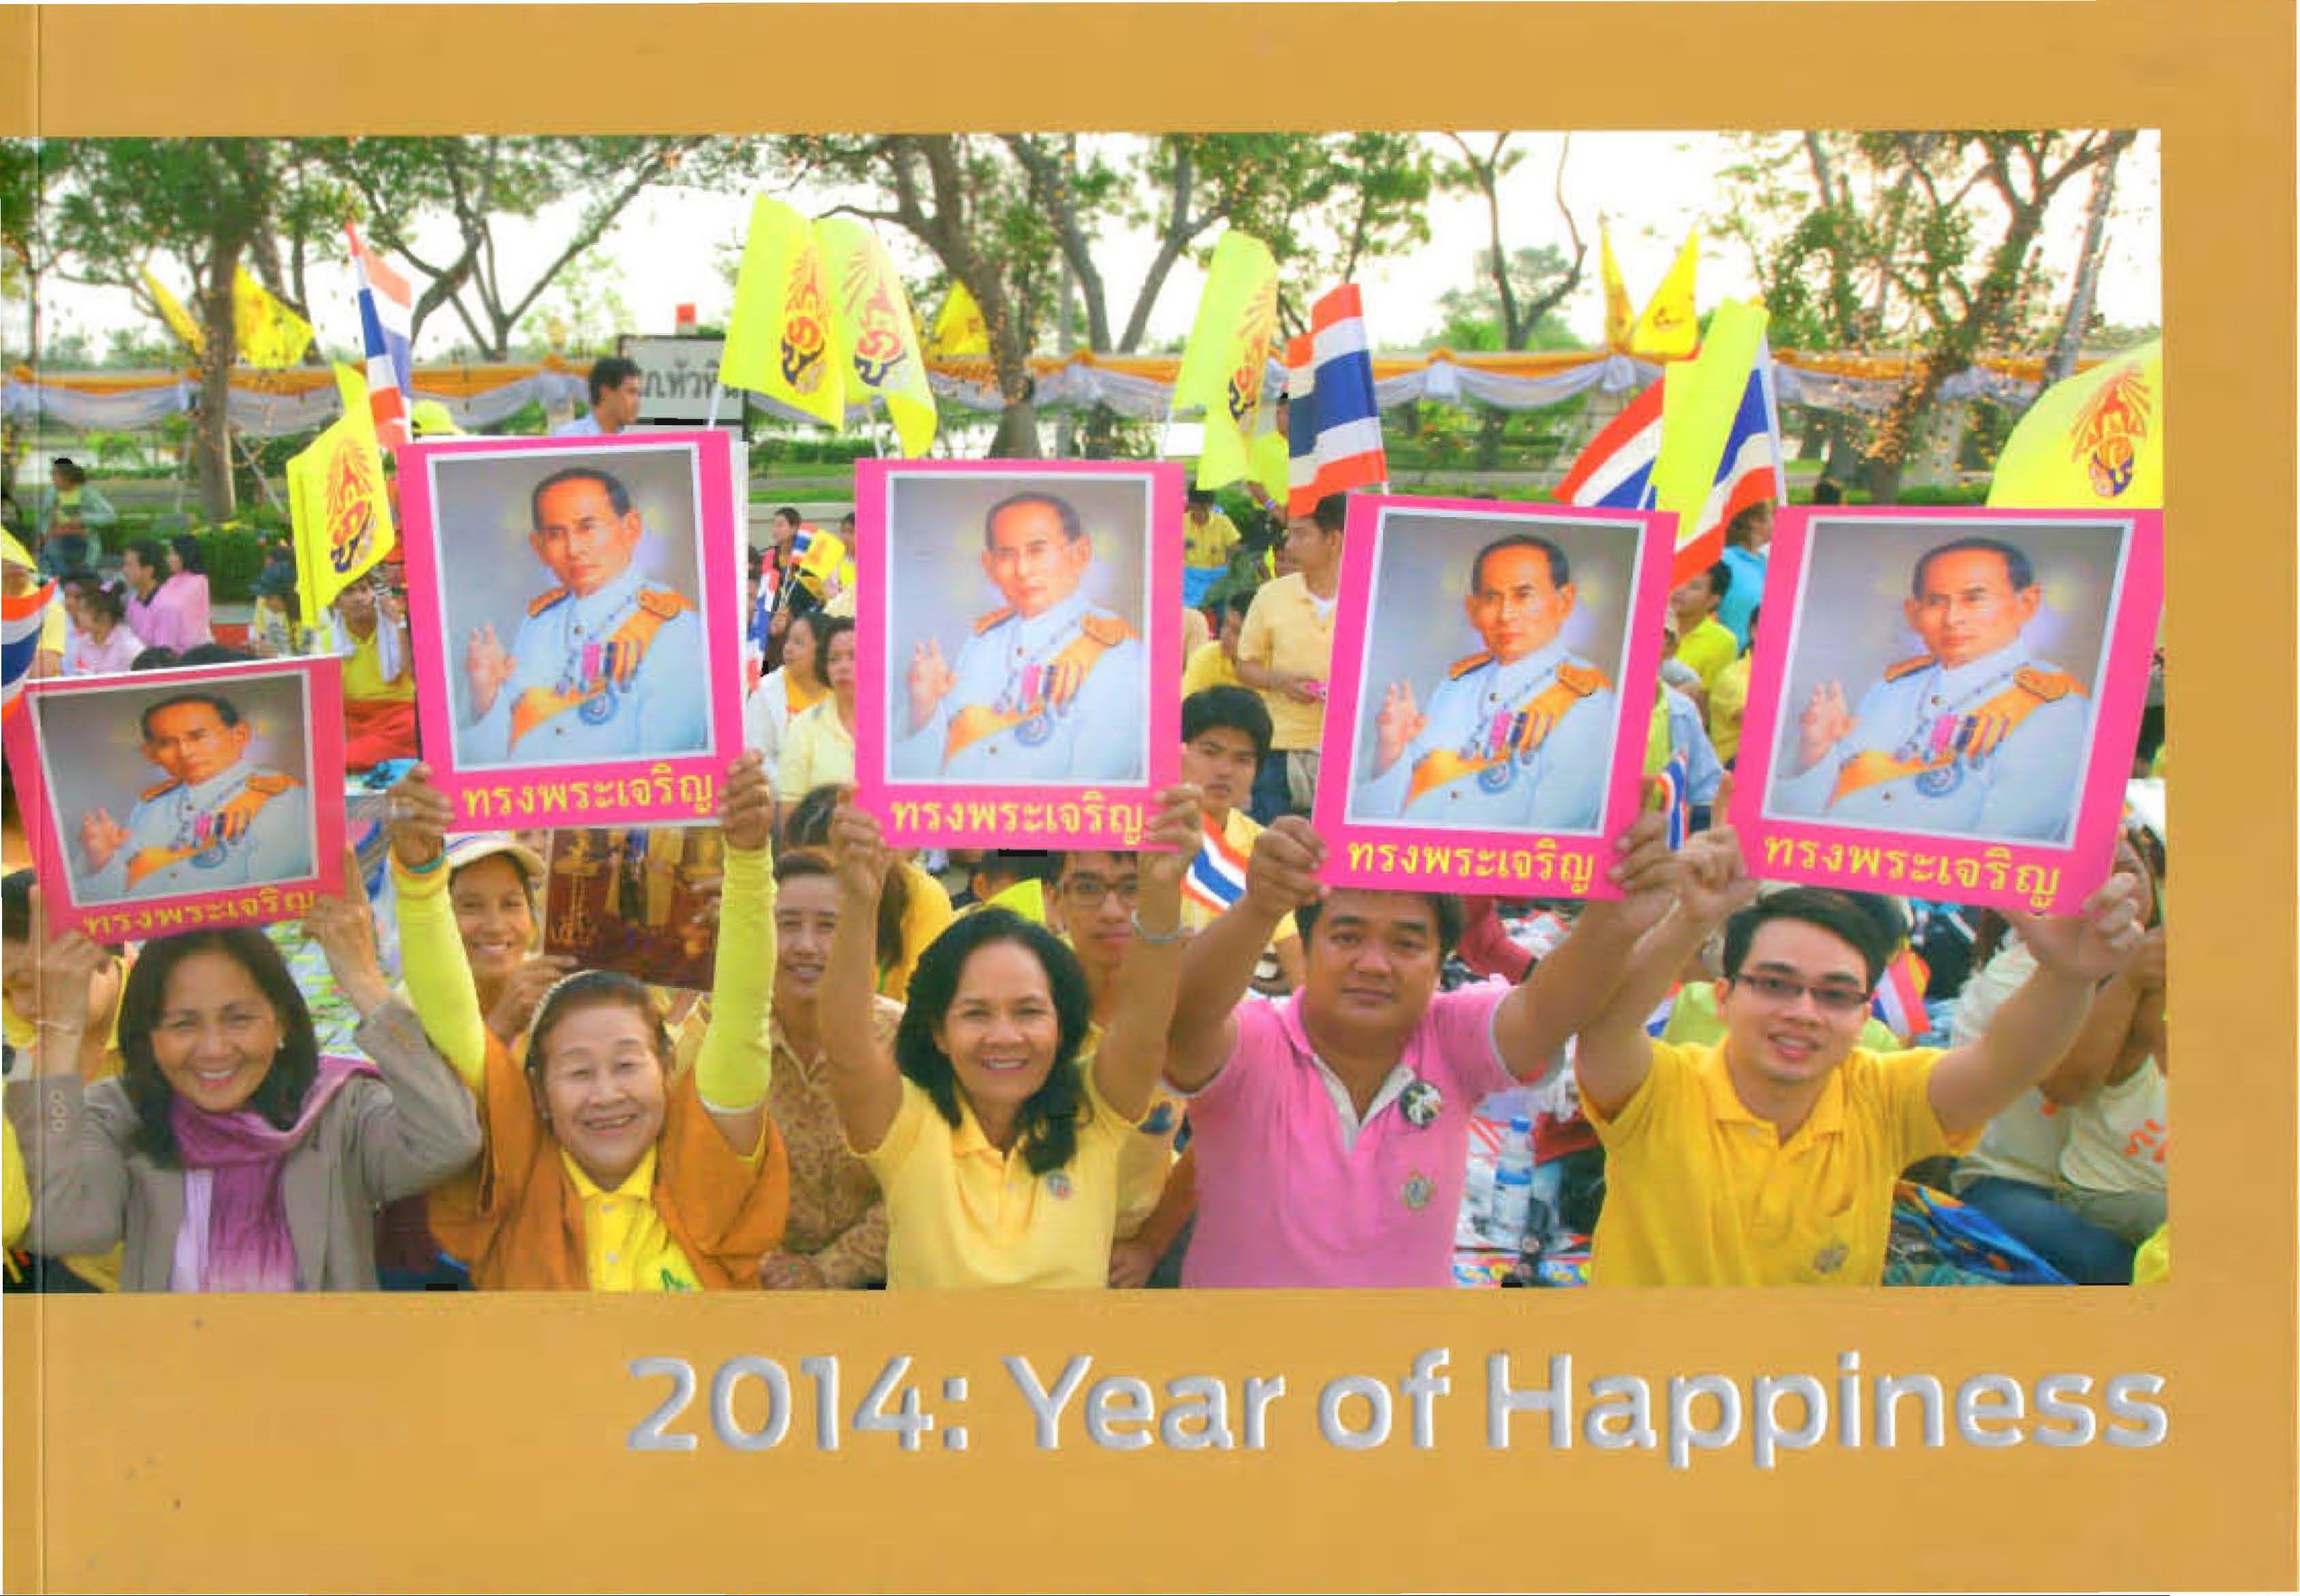 2014 : Year of Happiness